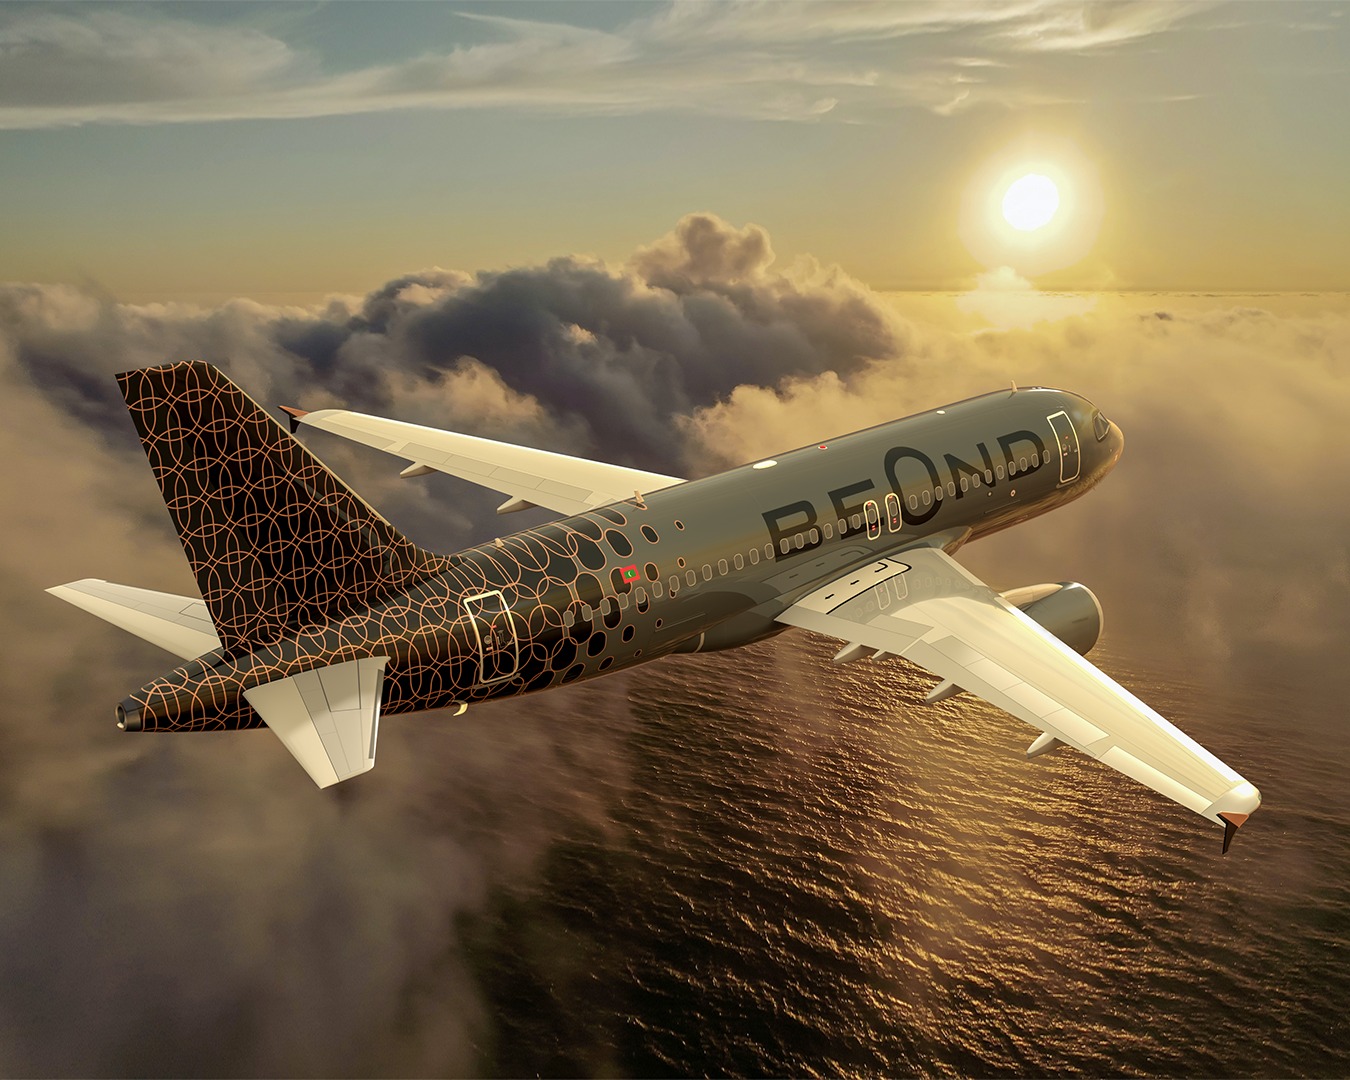 The New Luxury Airline Taking You Beyond Ordinary to the Maldives